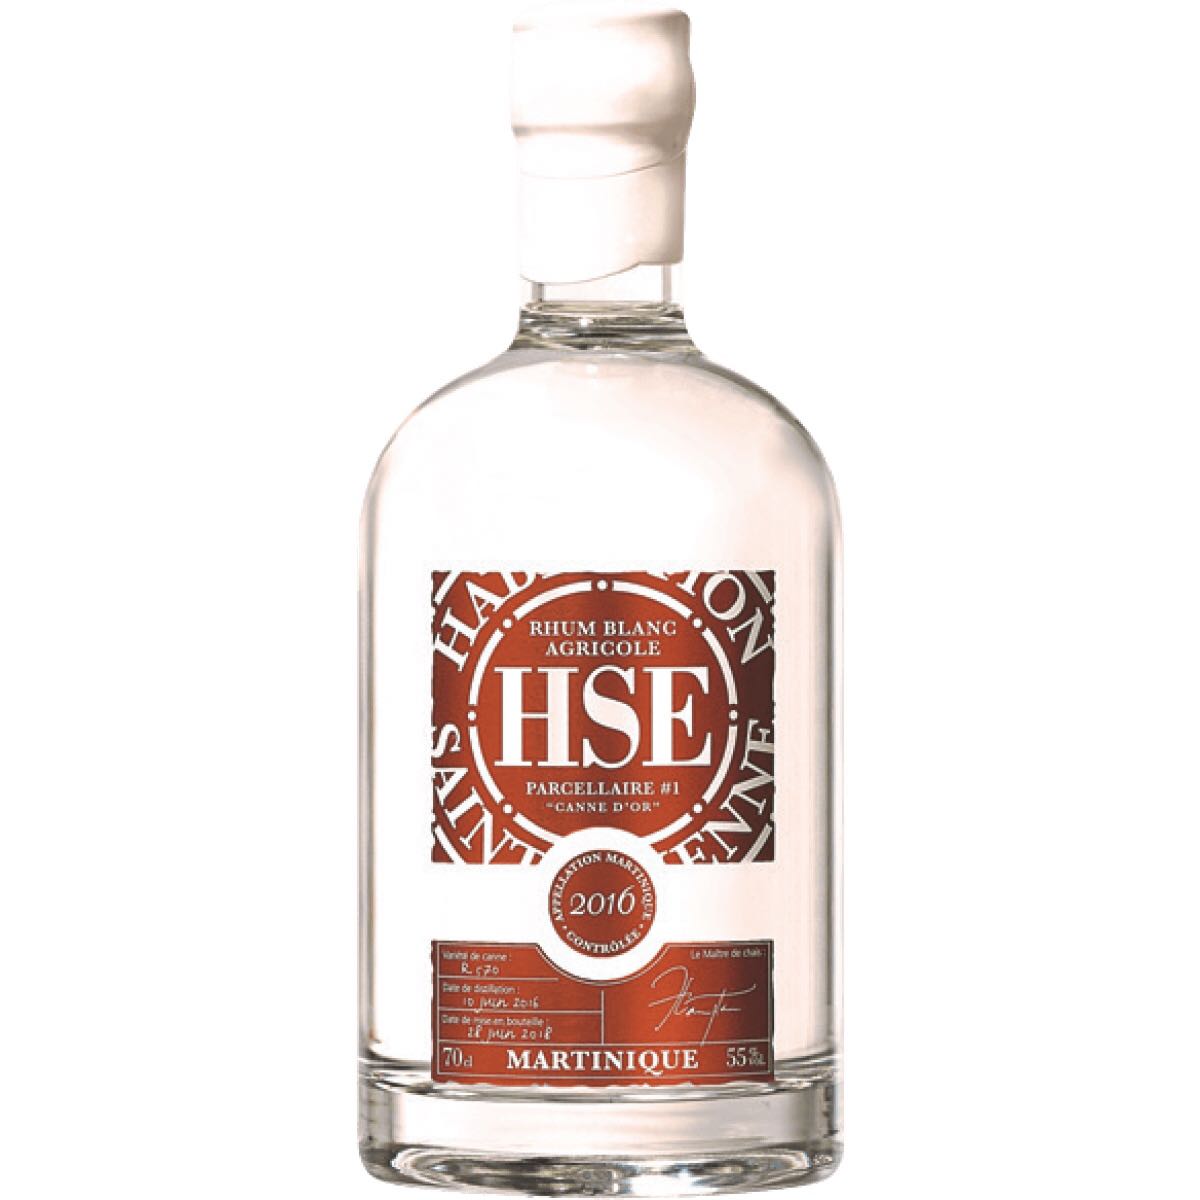 Bottle image of HSE Parcellaire #1 Canne d‘Or